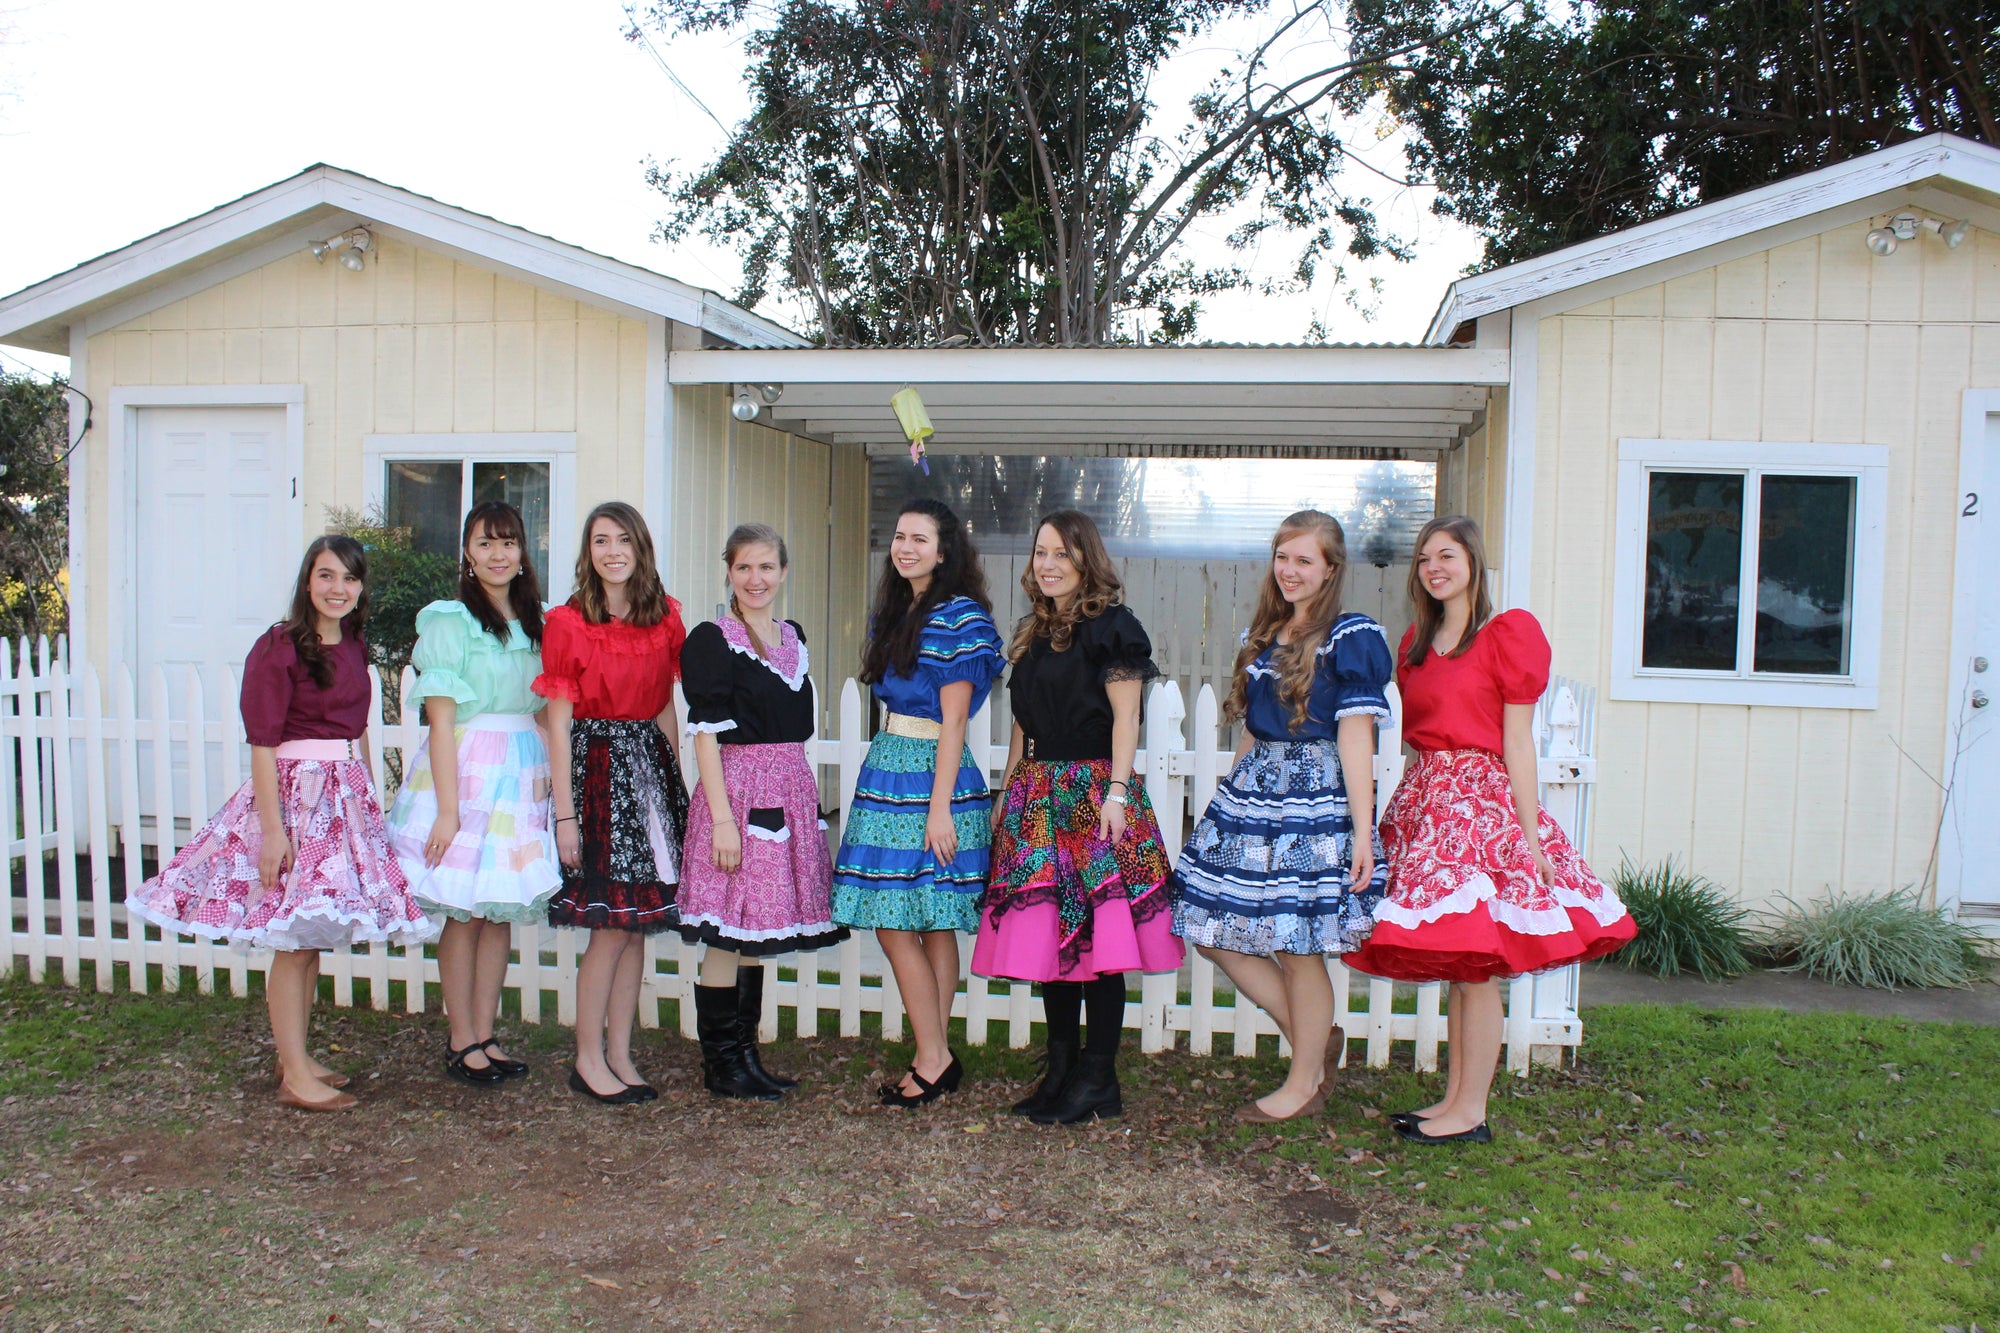 Girls in Square Dance Clothing